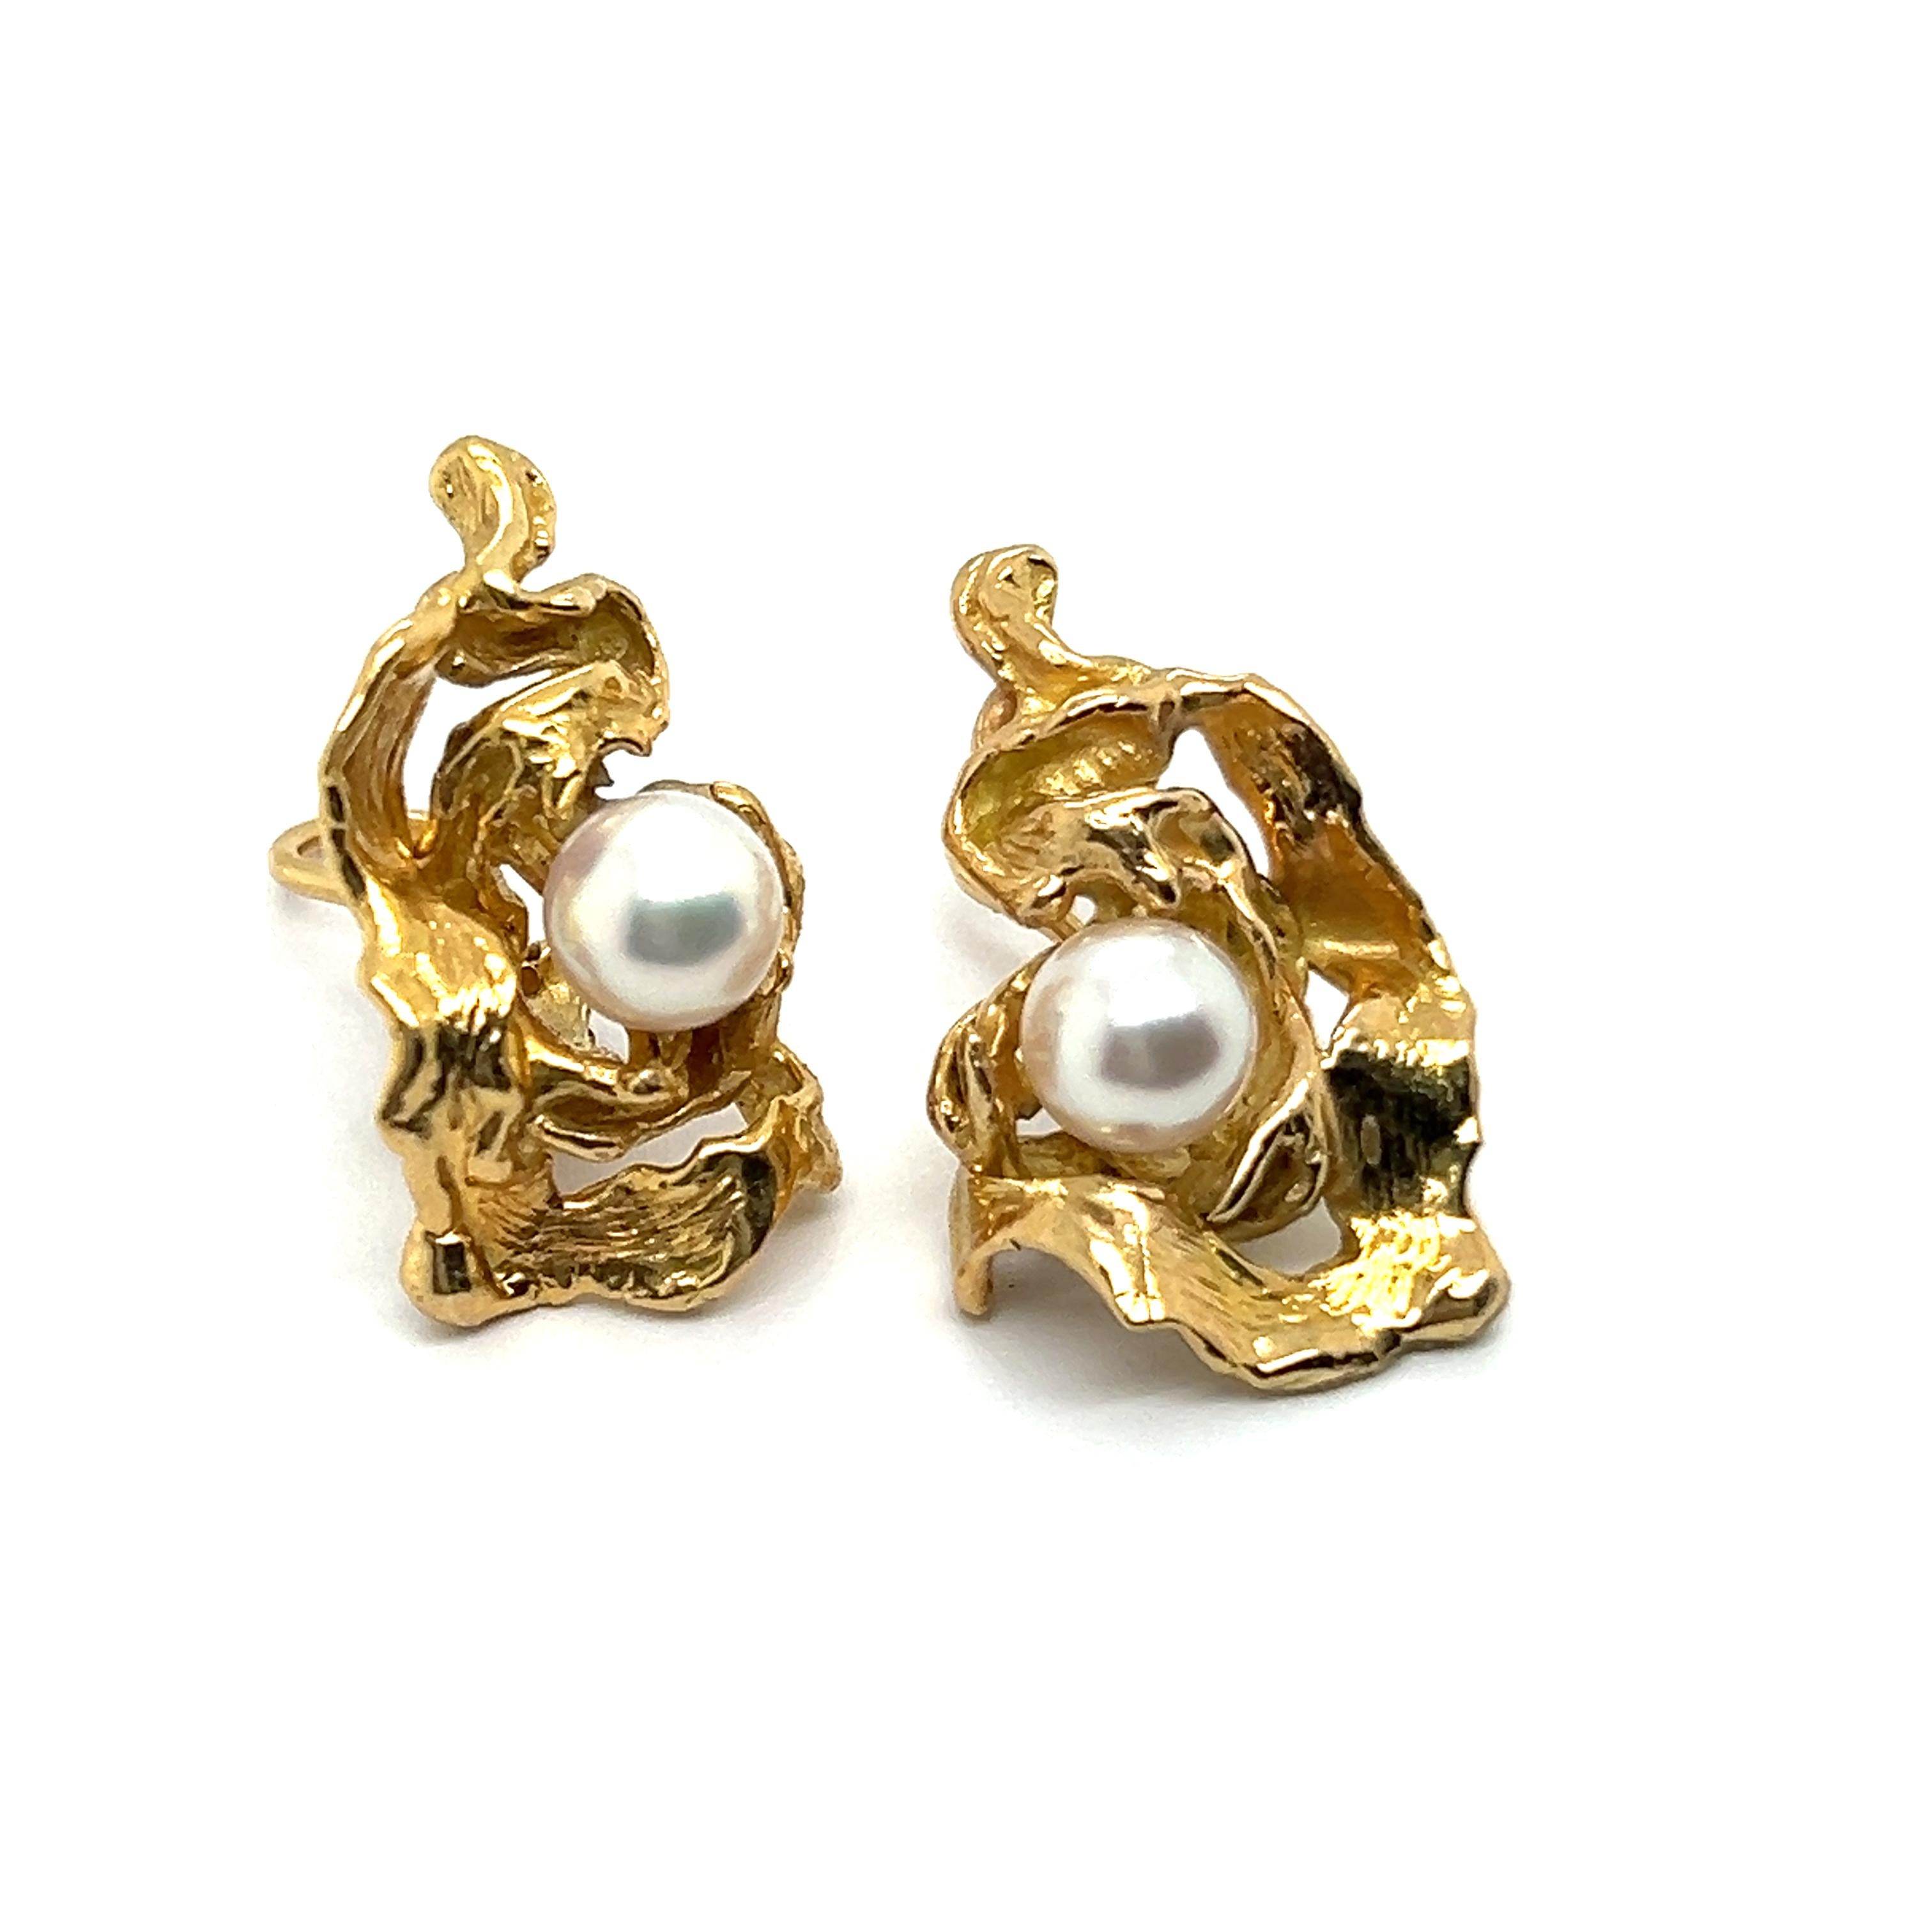 Sculptural Earrings with Akoya Pearls in 18 Karat Yellow Gold by Gilbert Albert For Sale 3